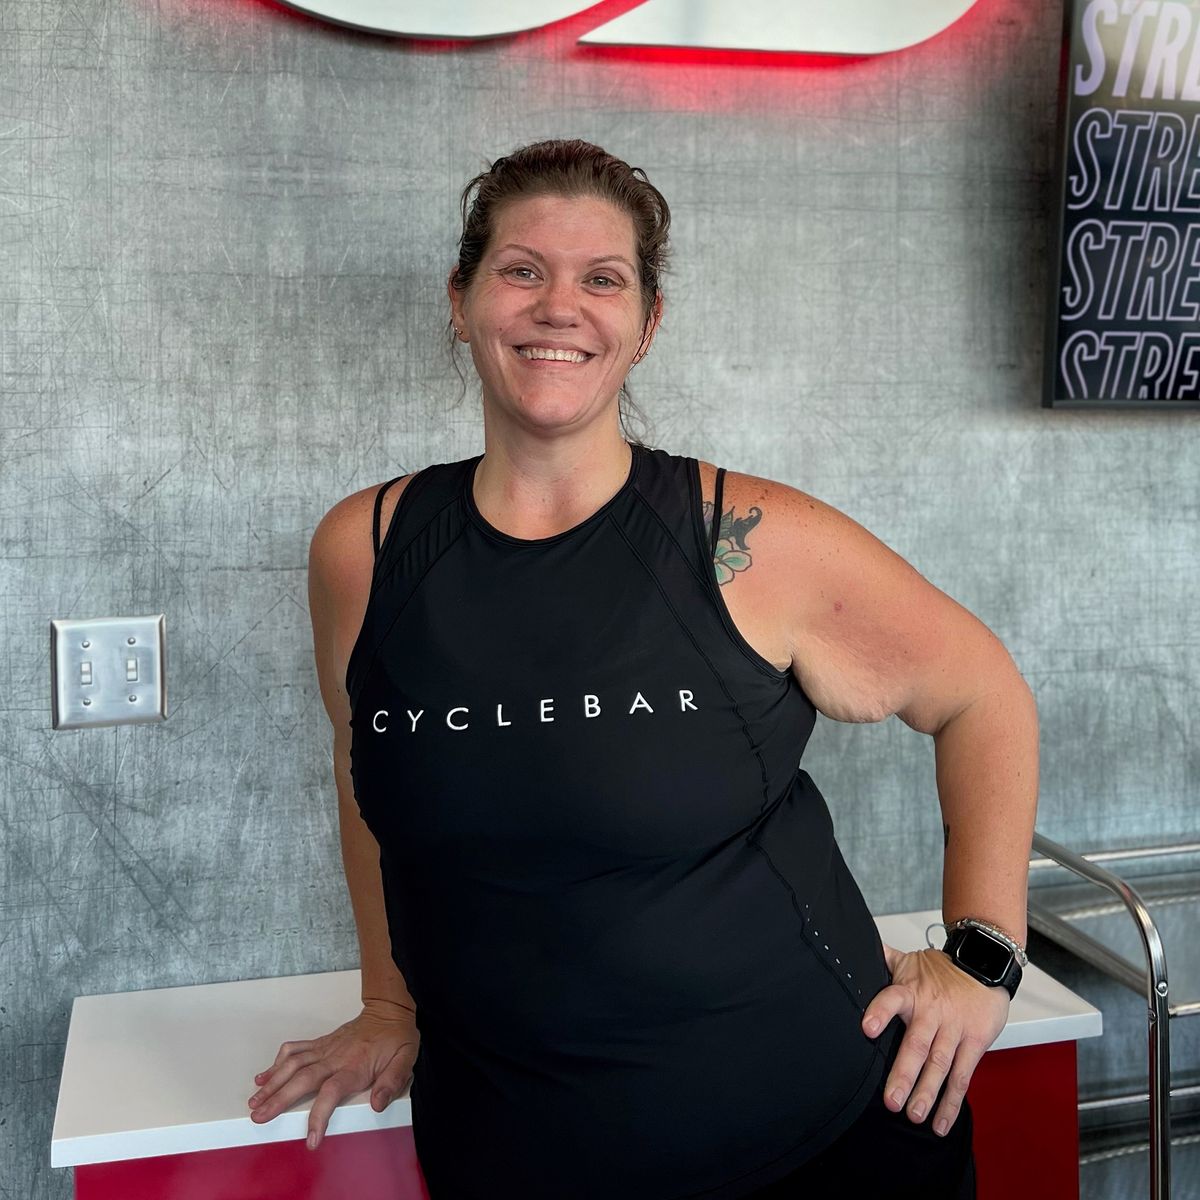 After Beating Thyroid Cancer, This Cyclist Lost 130 Pounds With Indoor Cycling